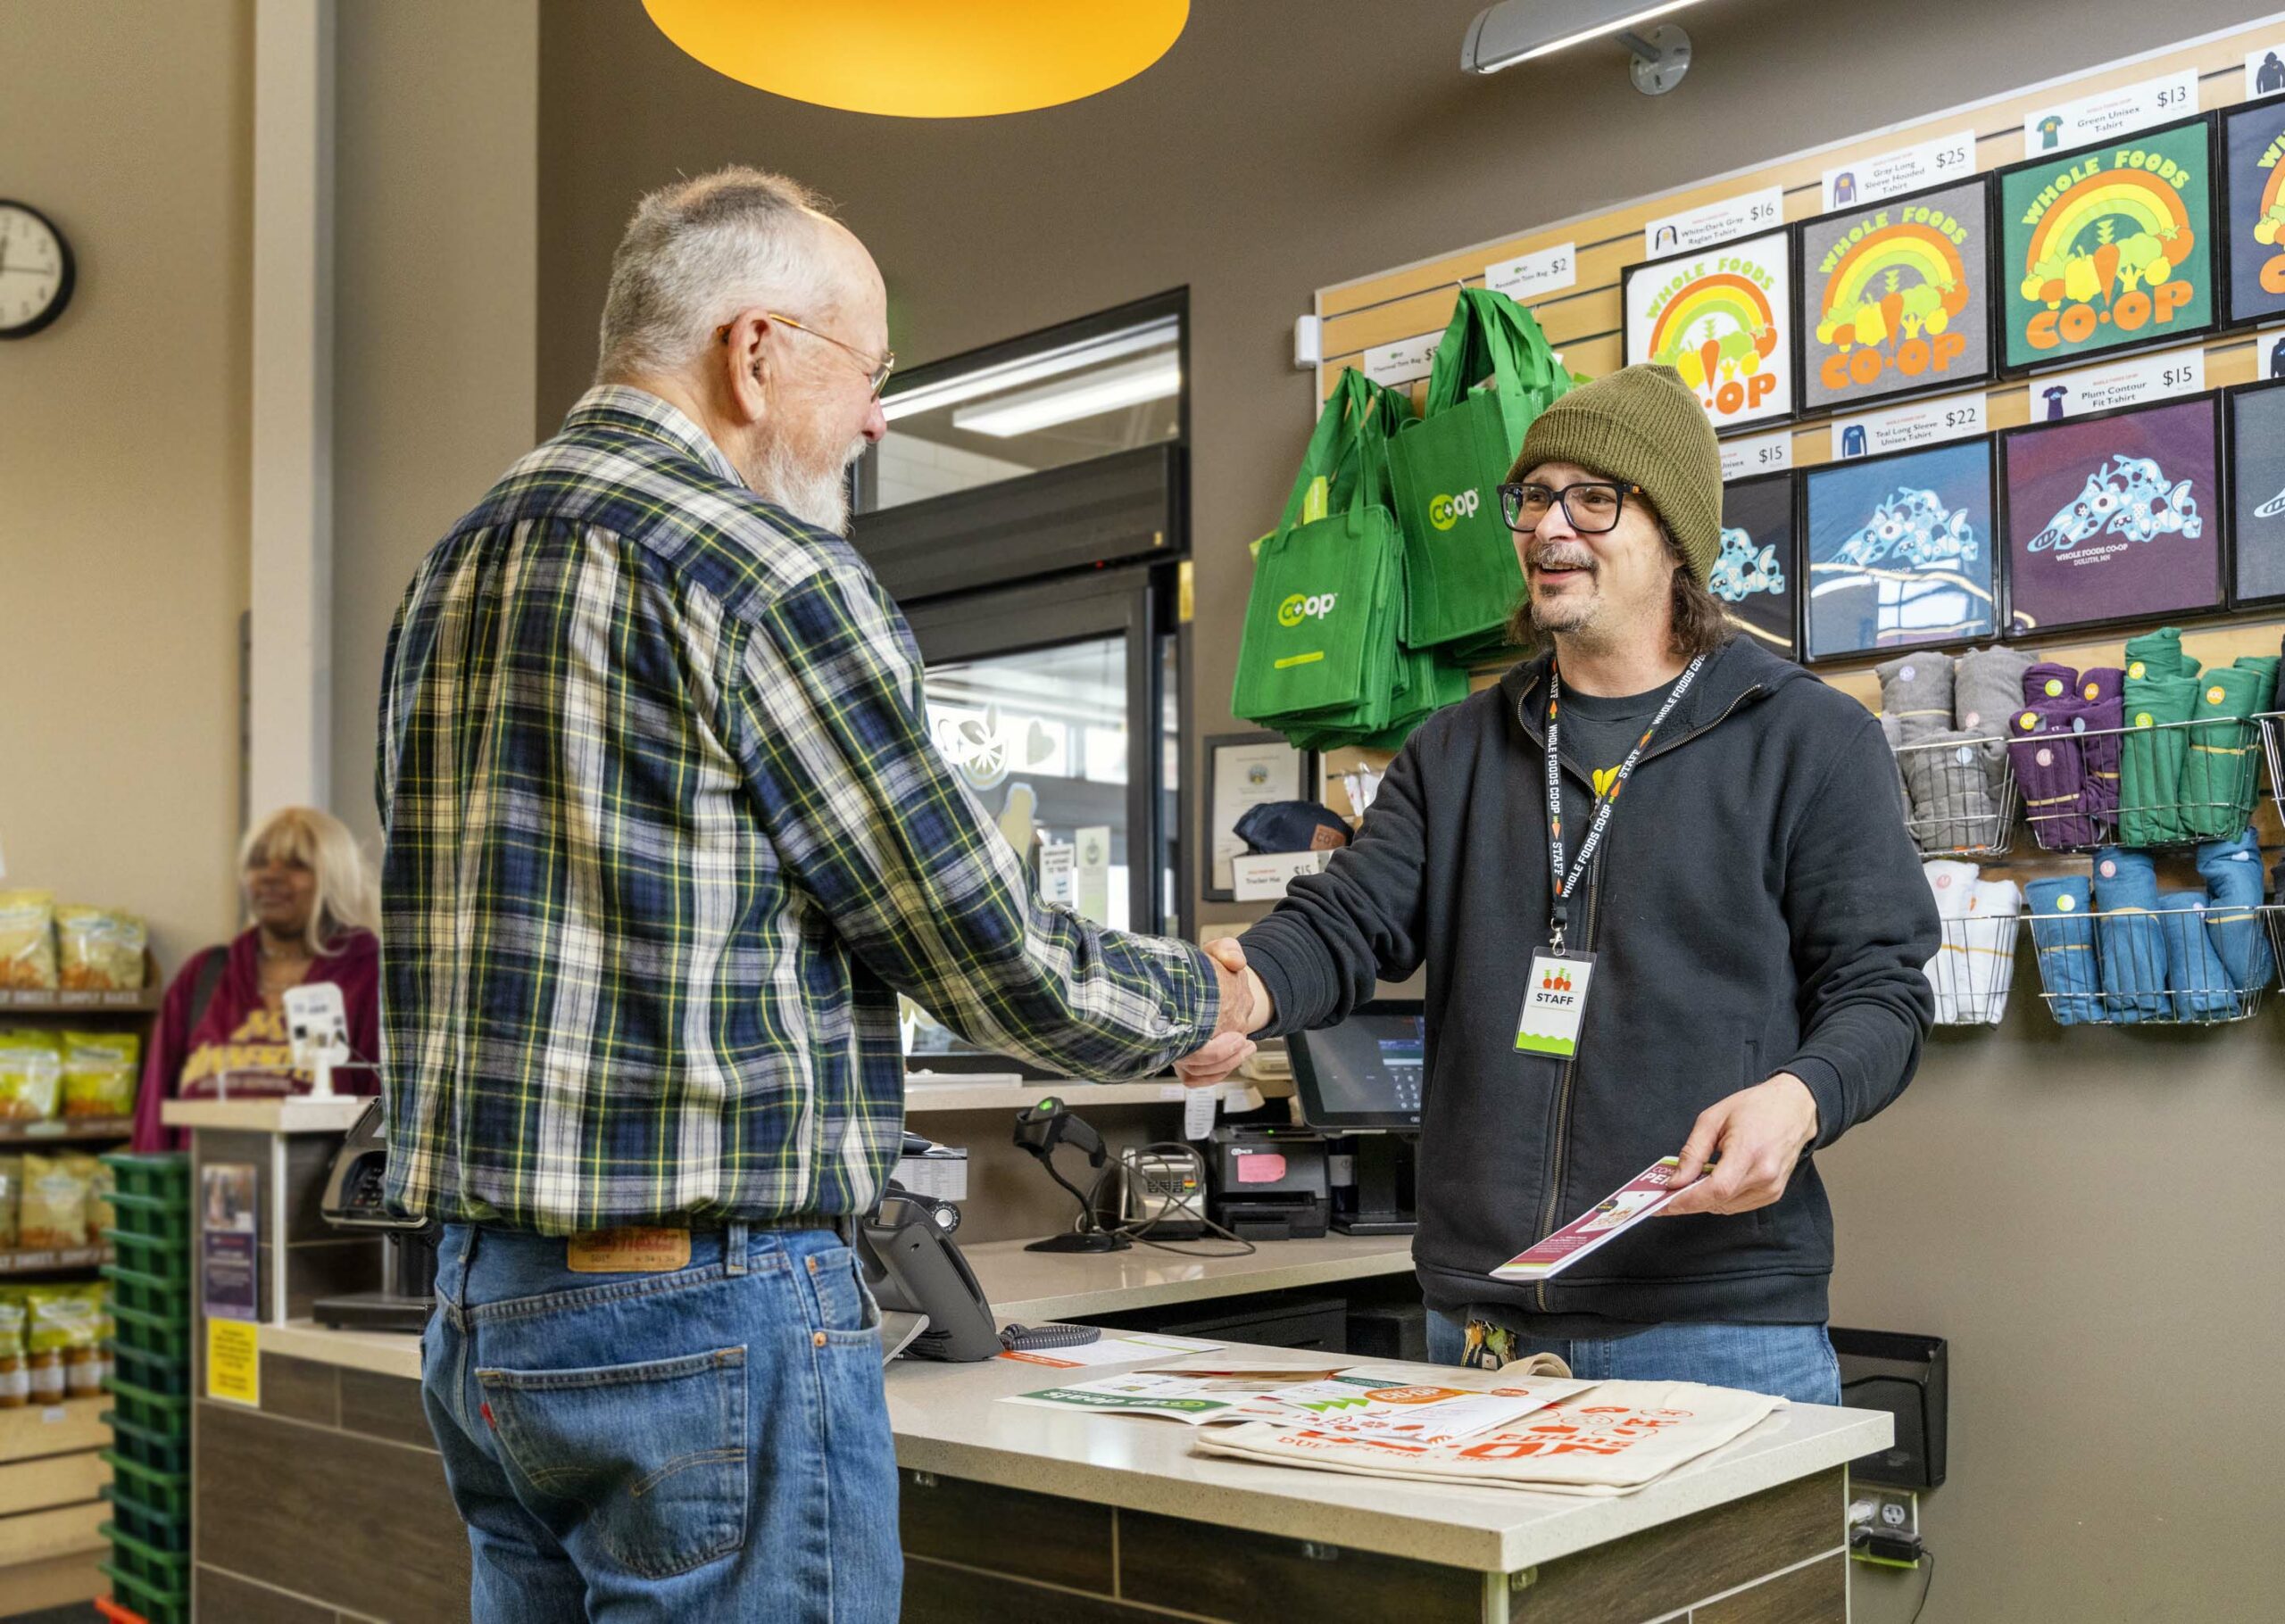 A man in a plaid shirt and a man in a beanie and glasses are shaking hands across a counter at the Whole Foods Coop in Duluth, MN. Shelves behind them display colorful products and reusable bags.